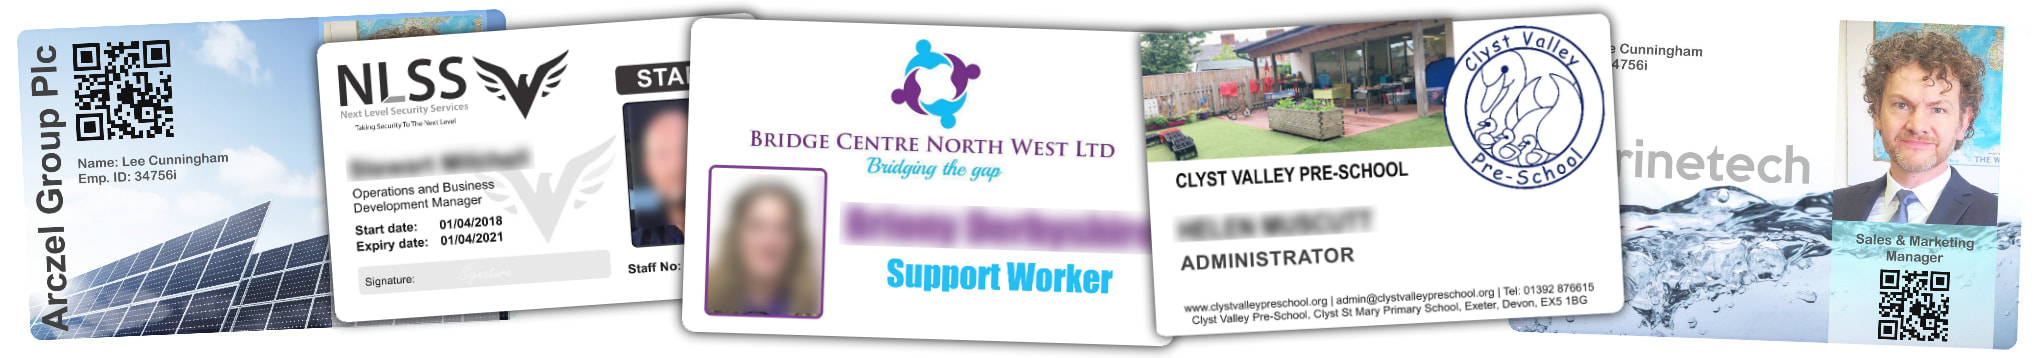 Maidstone examples of staff photo ID cards | samples of employee Identity card printing | Workers ID cards printed in 